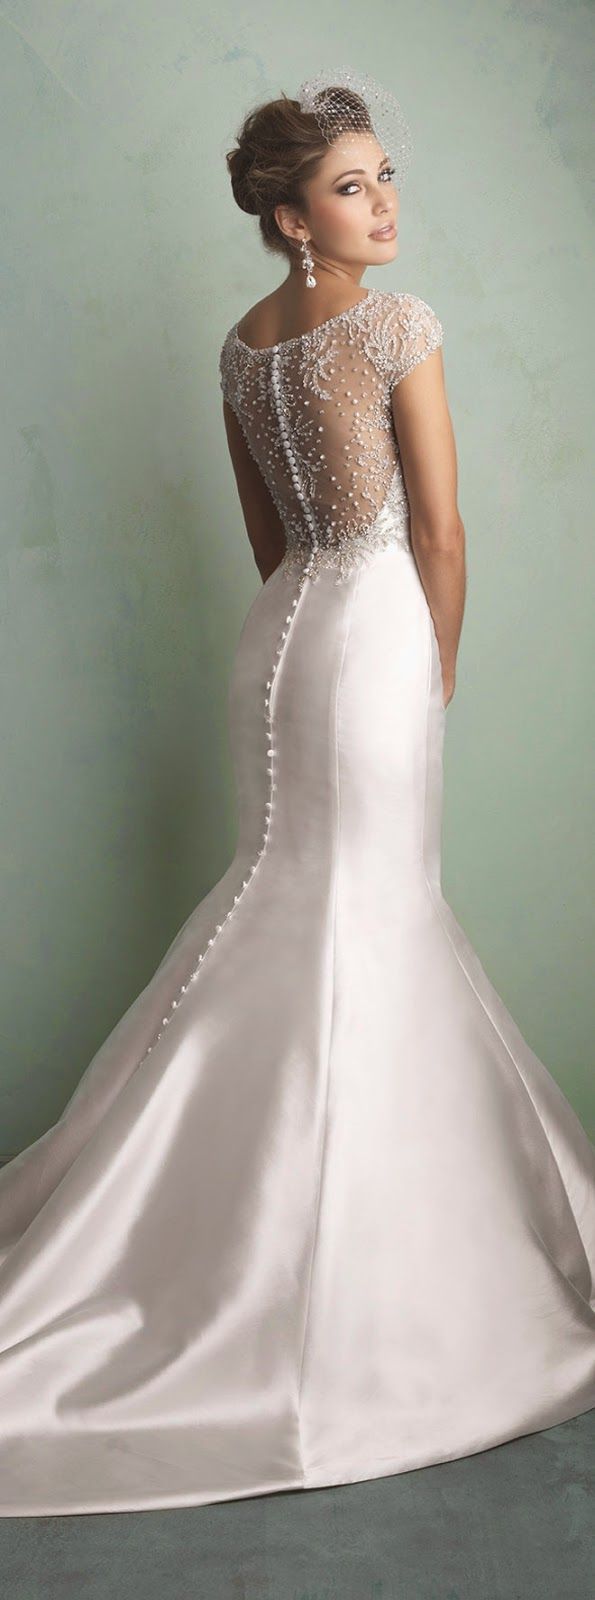 Mariage - Buttons Down The Back: Sophisticated Wedding Gowns